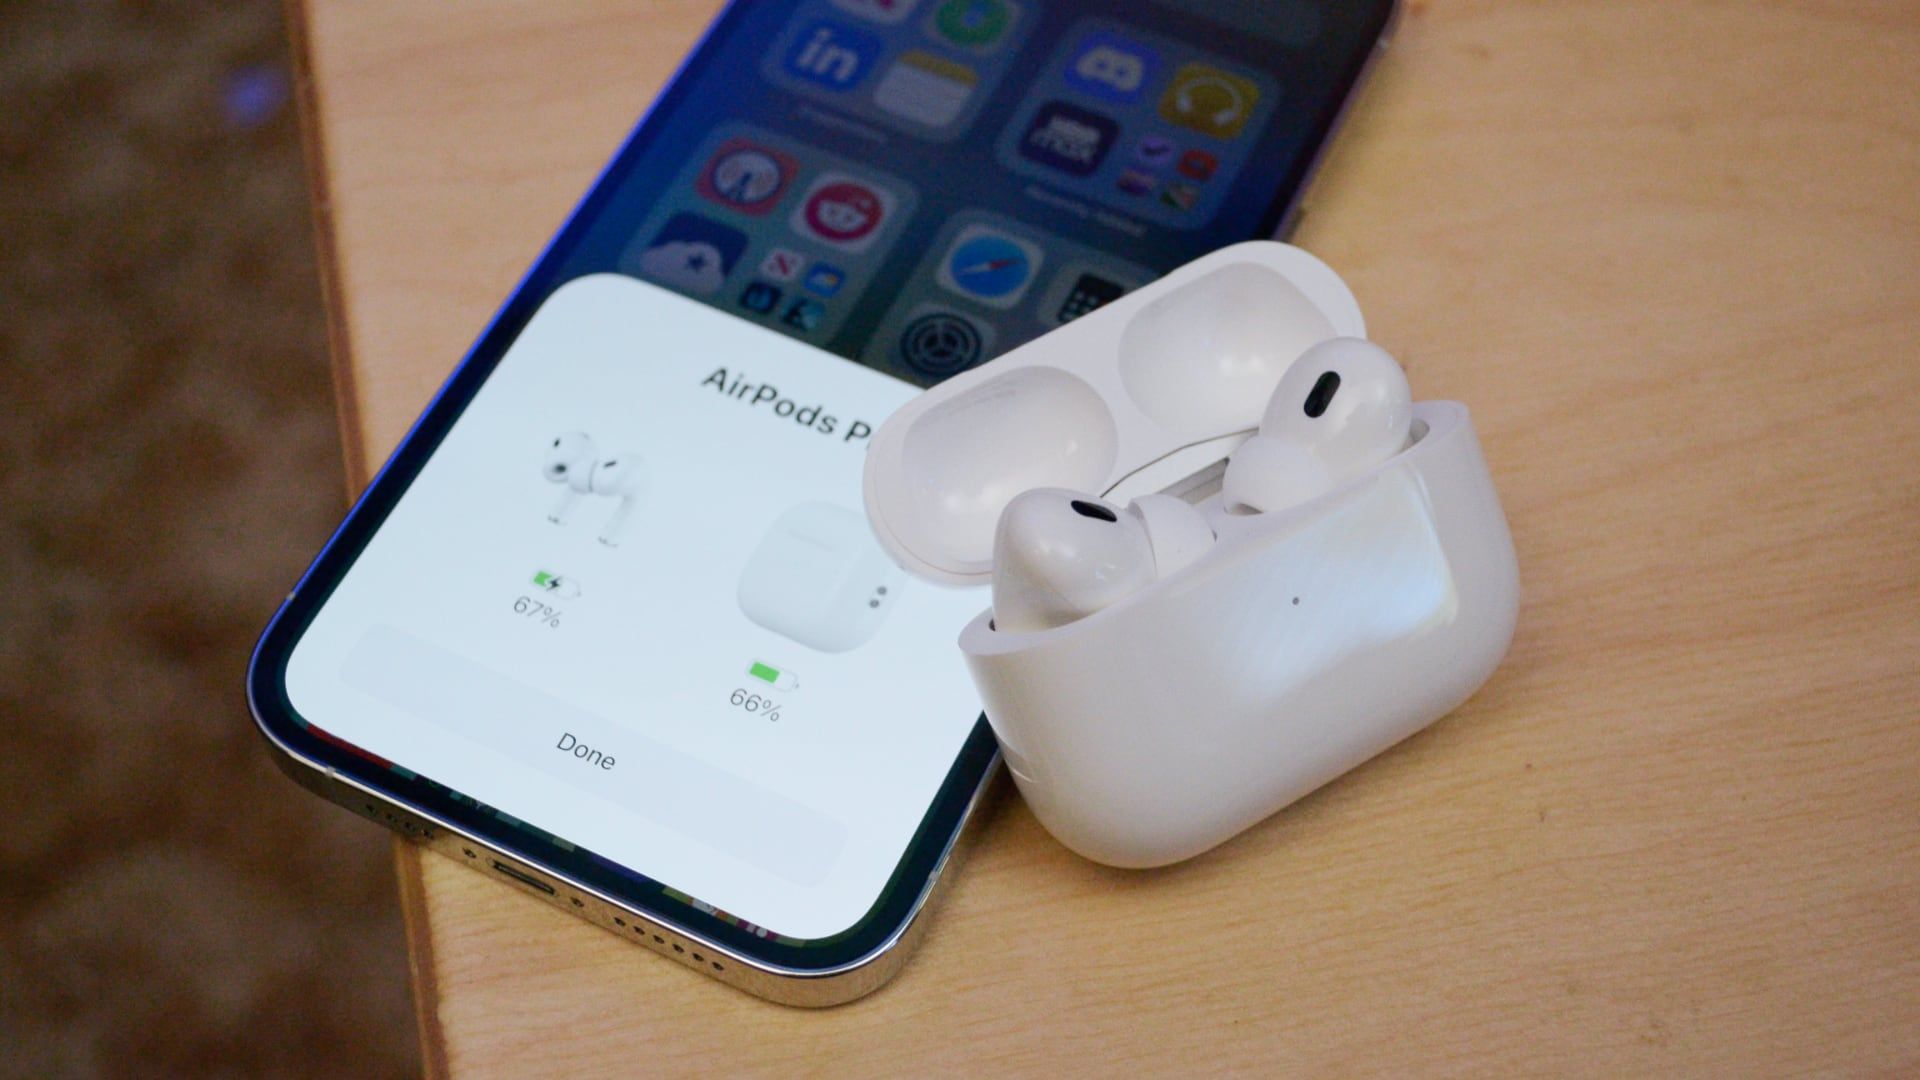 Pairing the Apple AirPods Pro 2